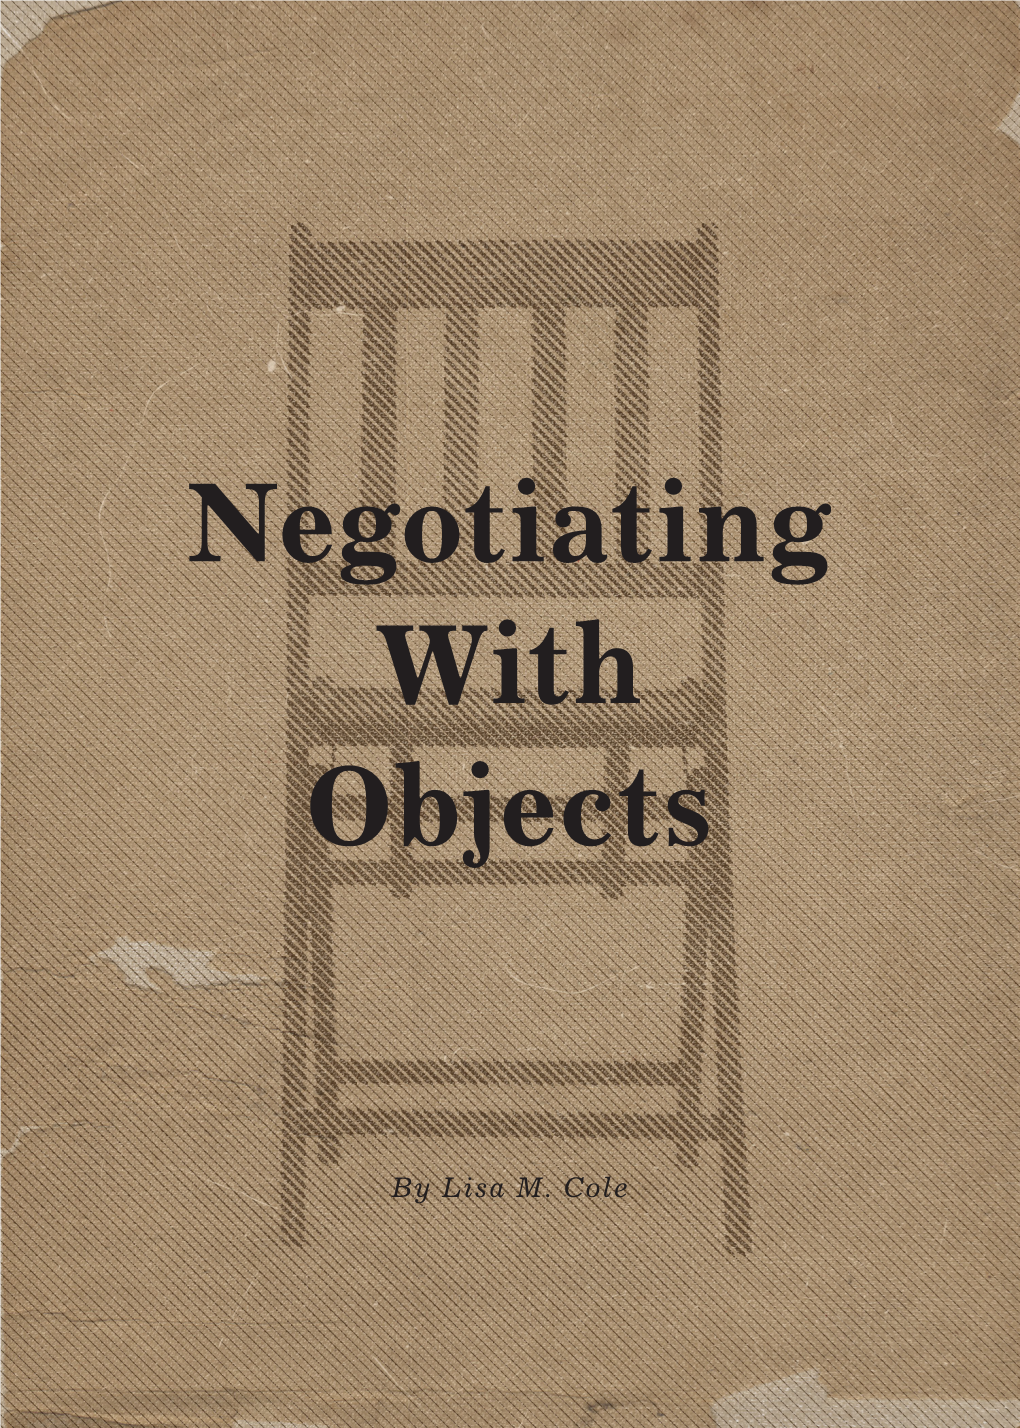 Negotiating with Objects